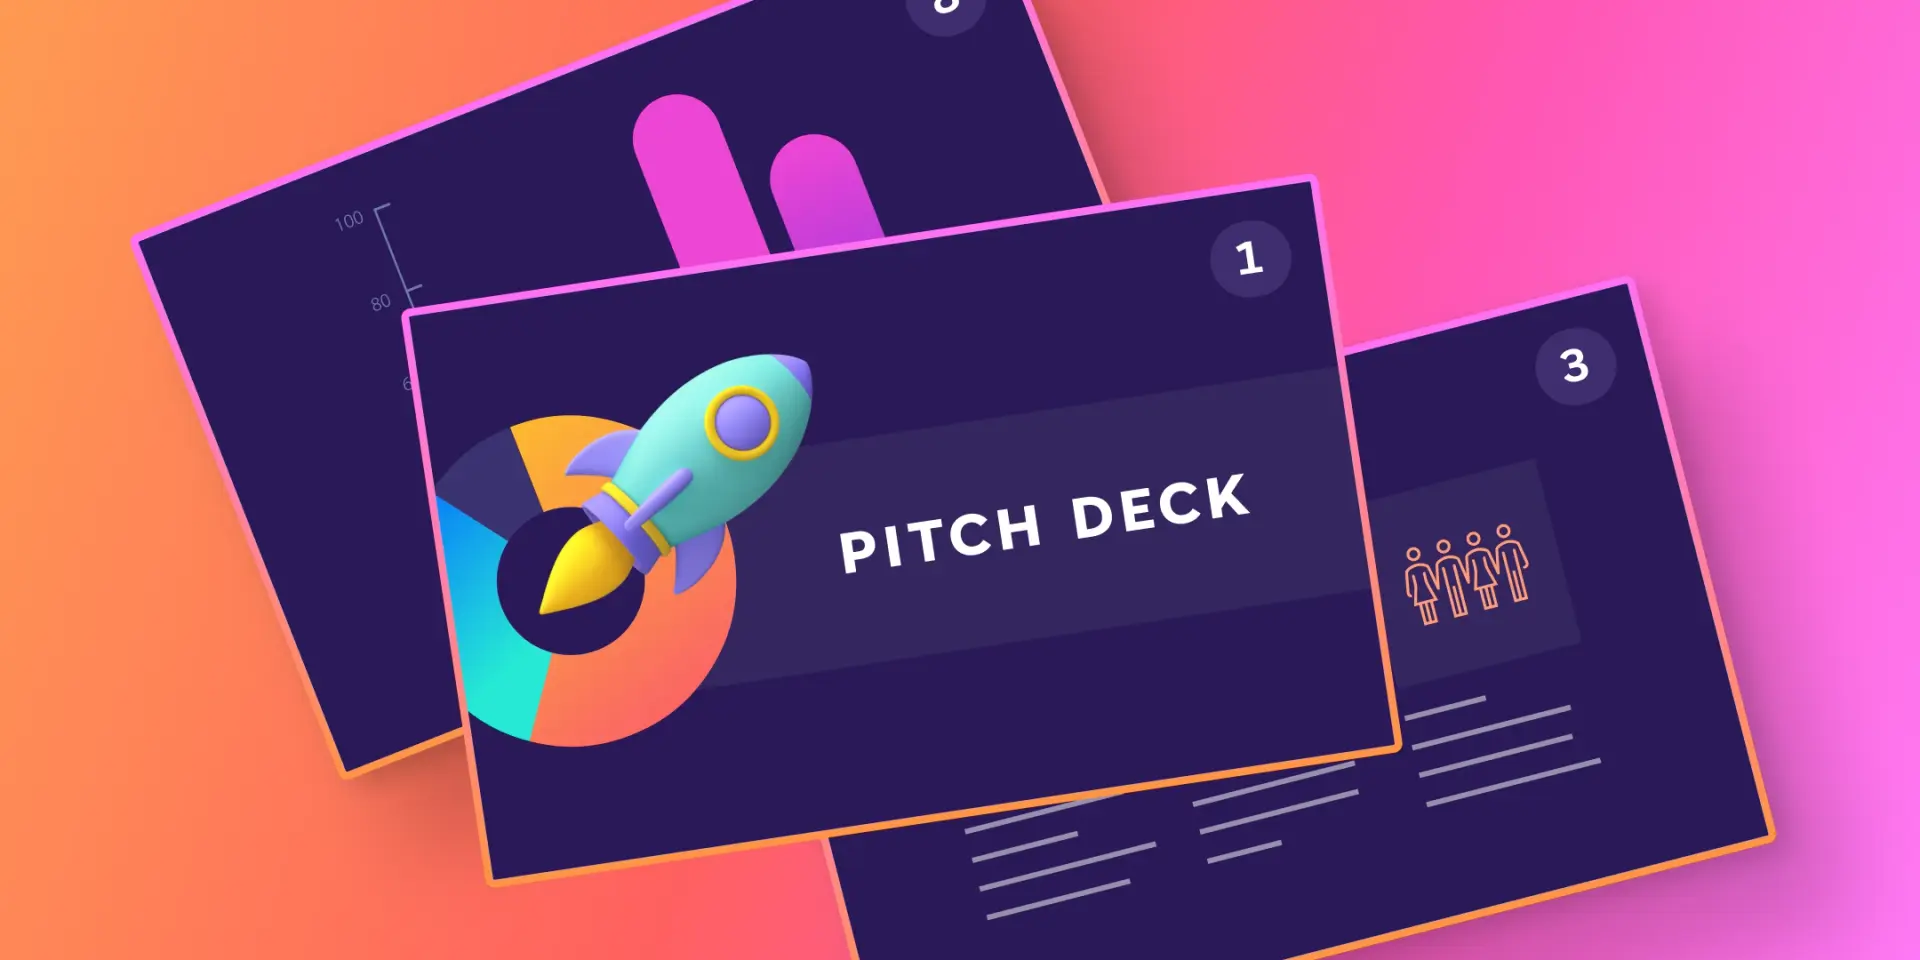 A graphic of three pitch decks layered on top of each other on a gradient background